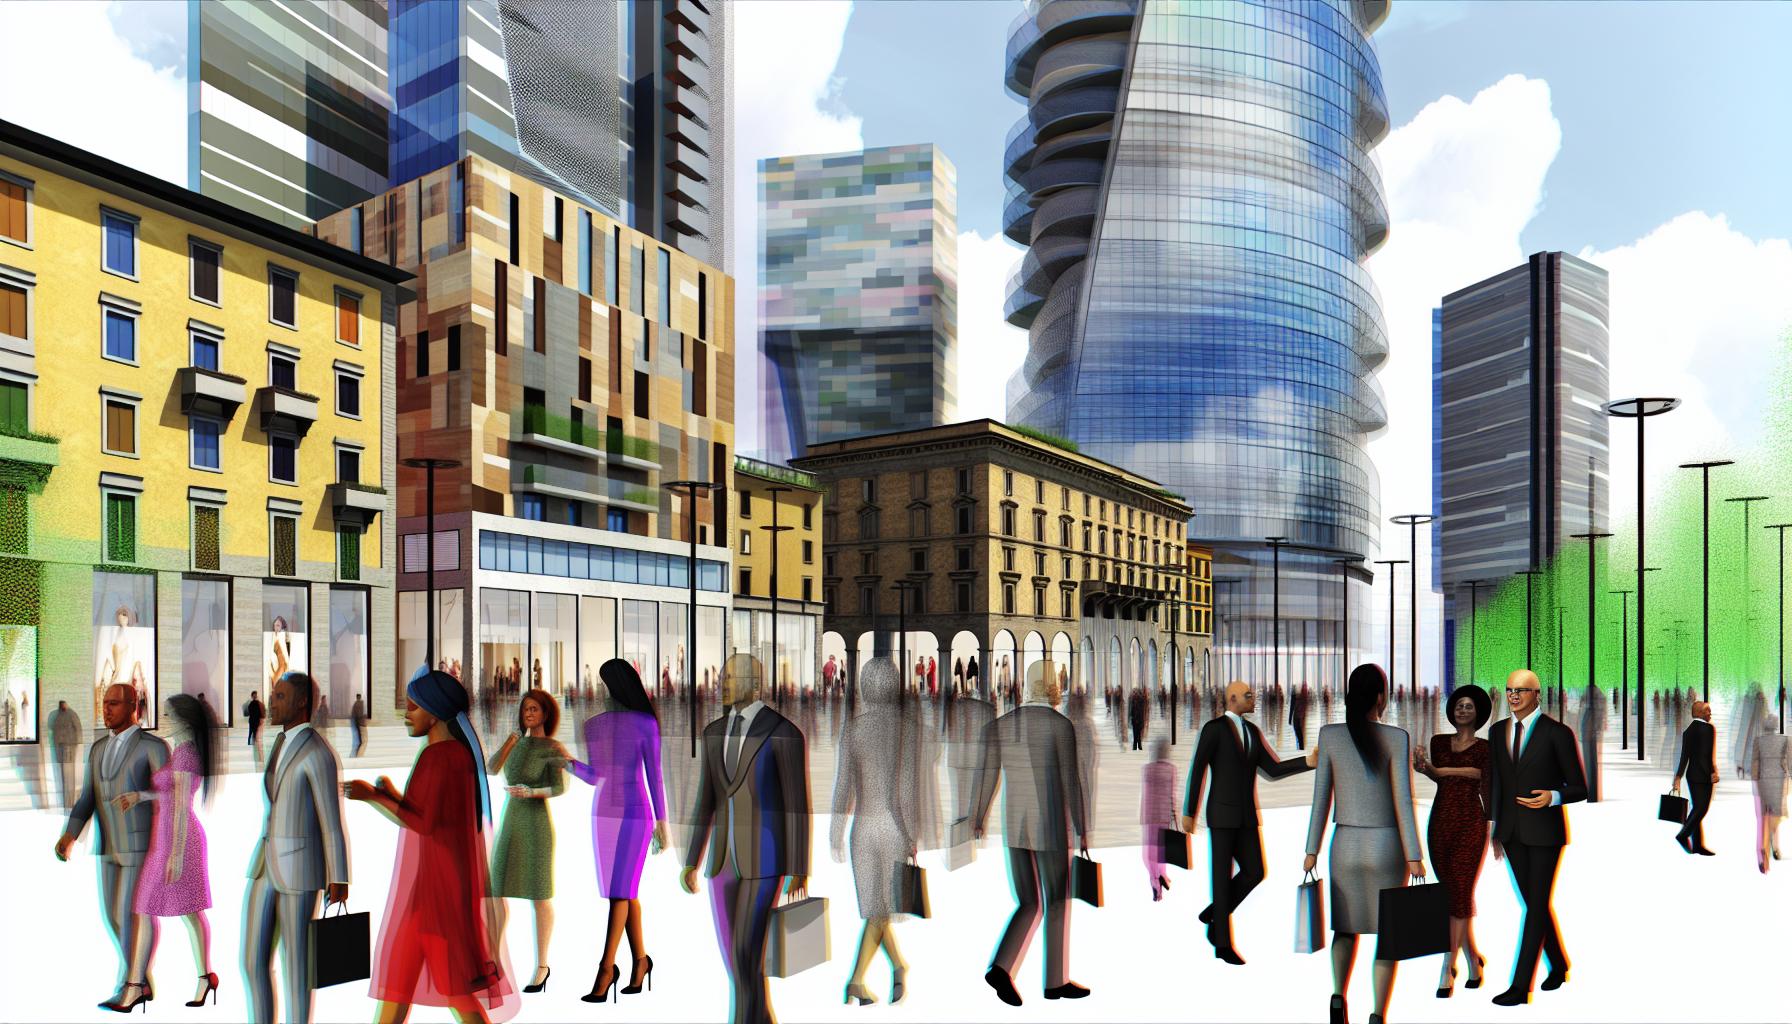 An image of the bustling city of Milan, Italy, showcasing modern architecture, fashion boutiques, and a vibrant business district